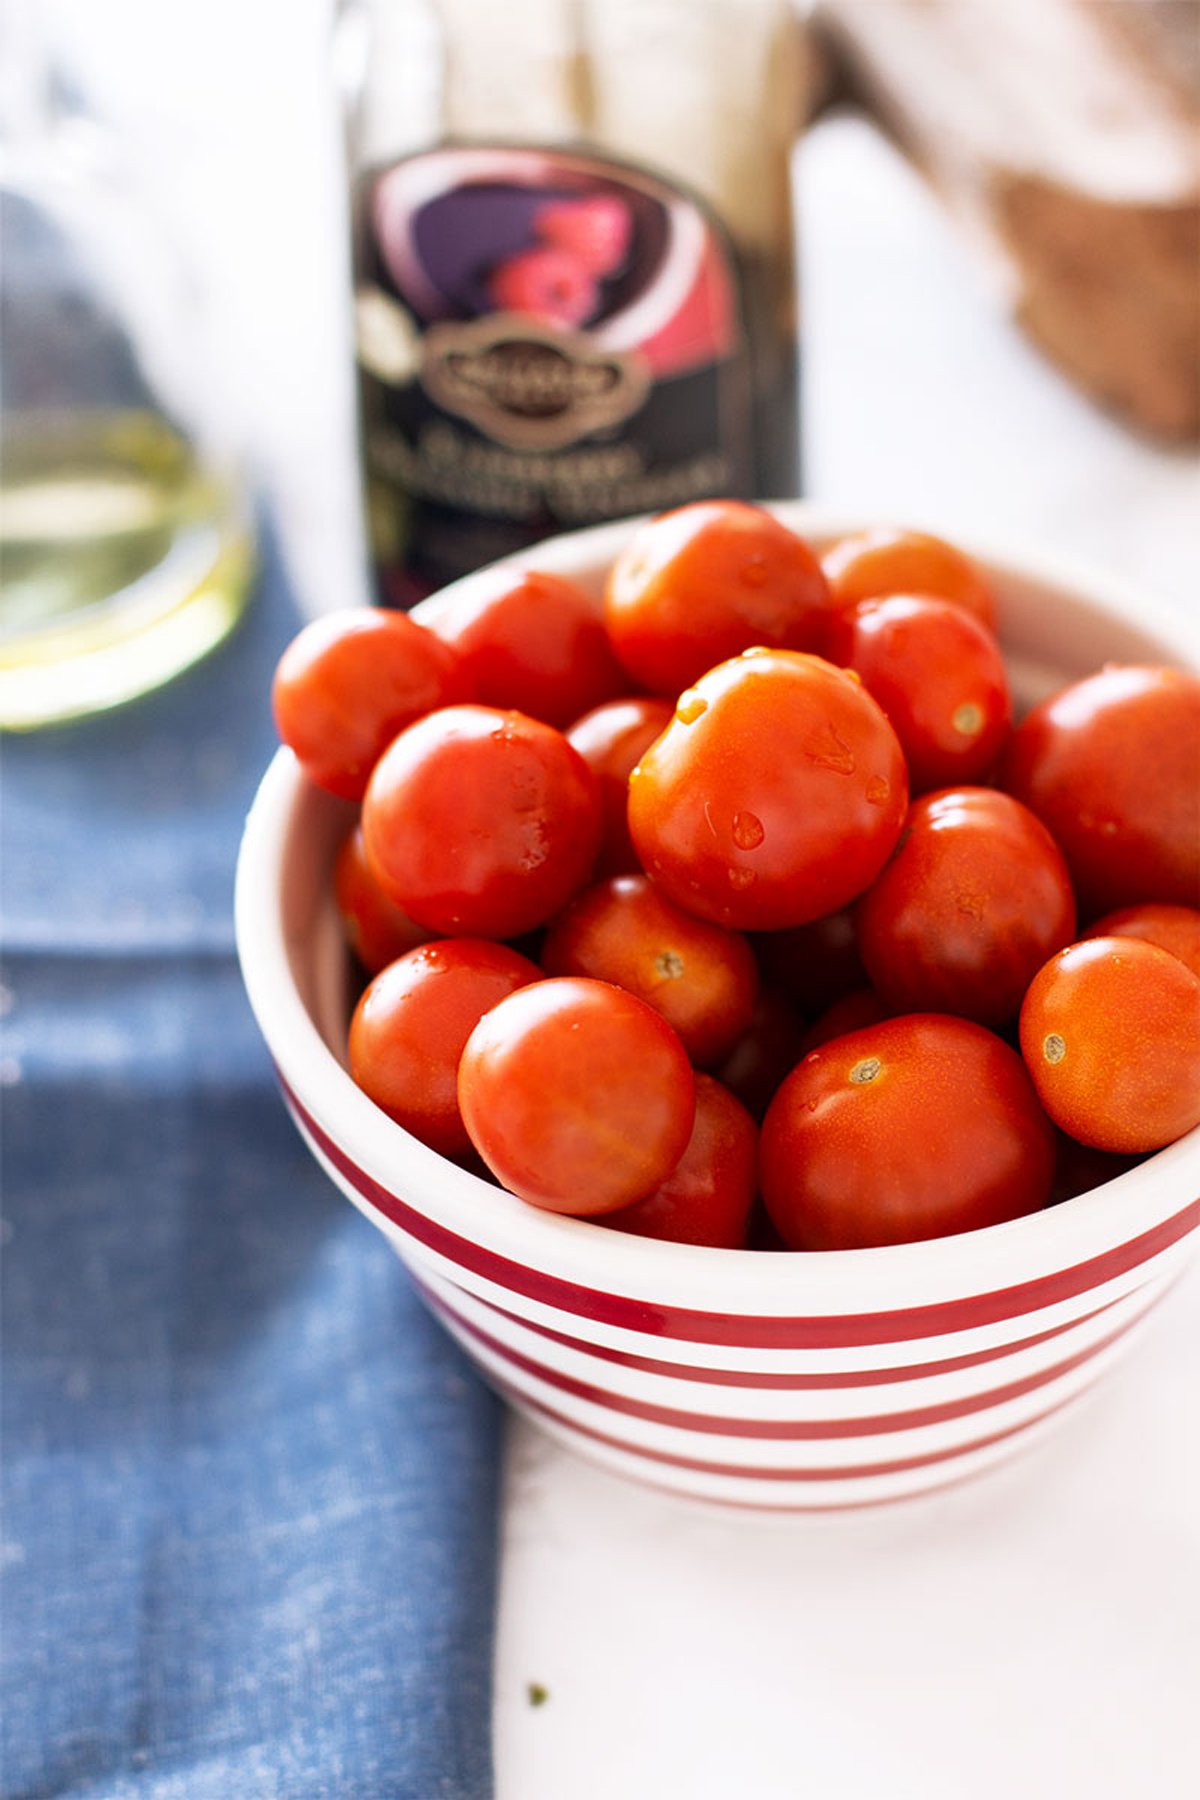 Red and white bowl containing cherry tomatoes sitting on a white table with a blue napkin.